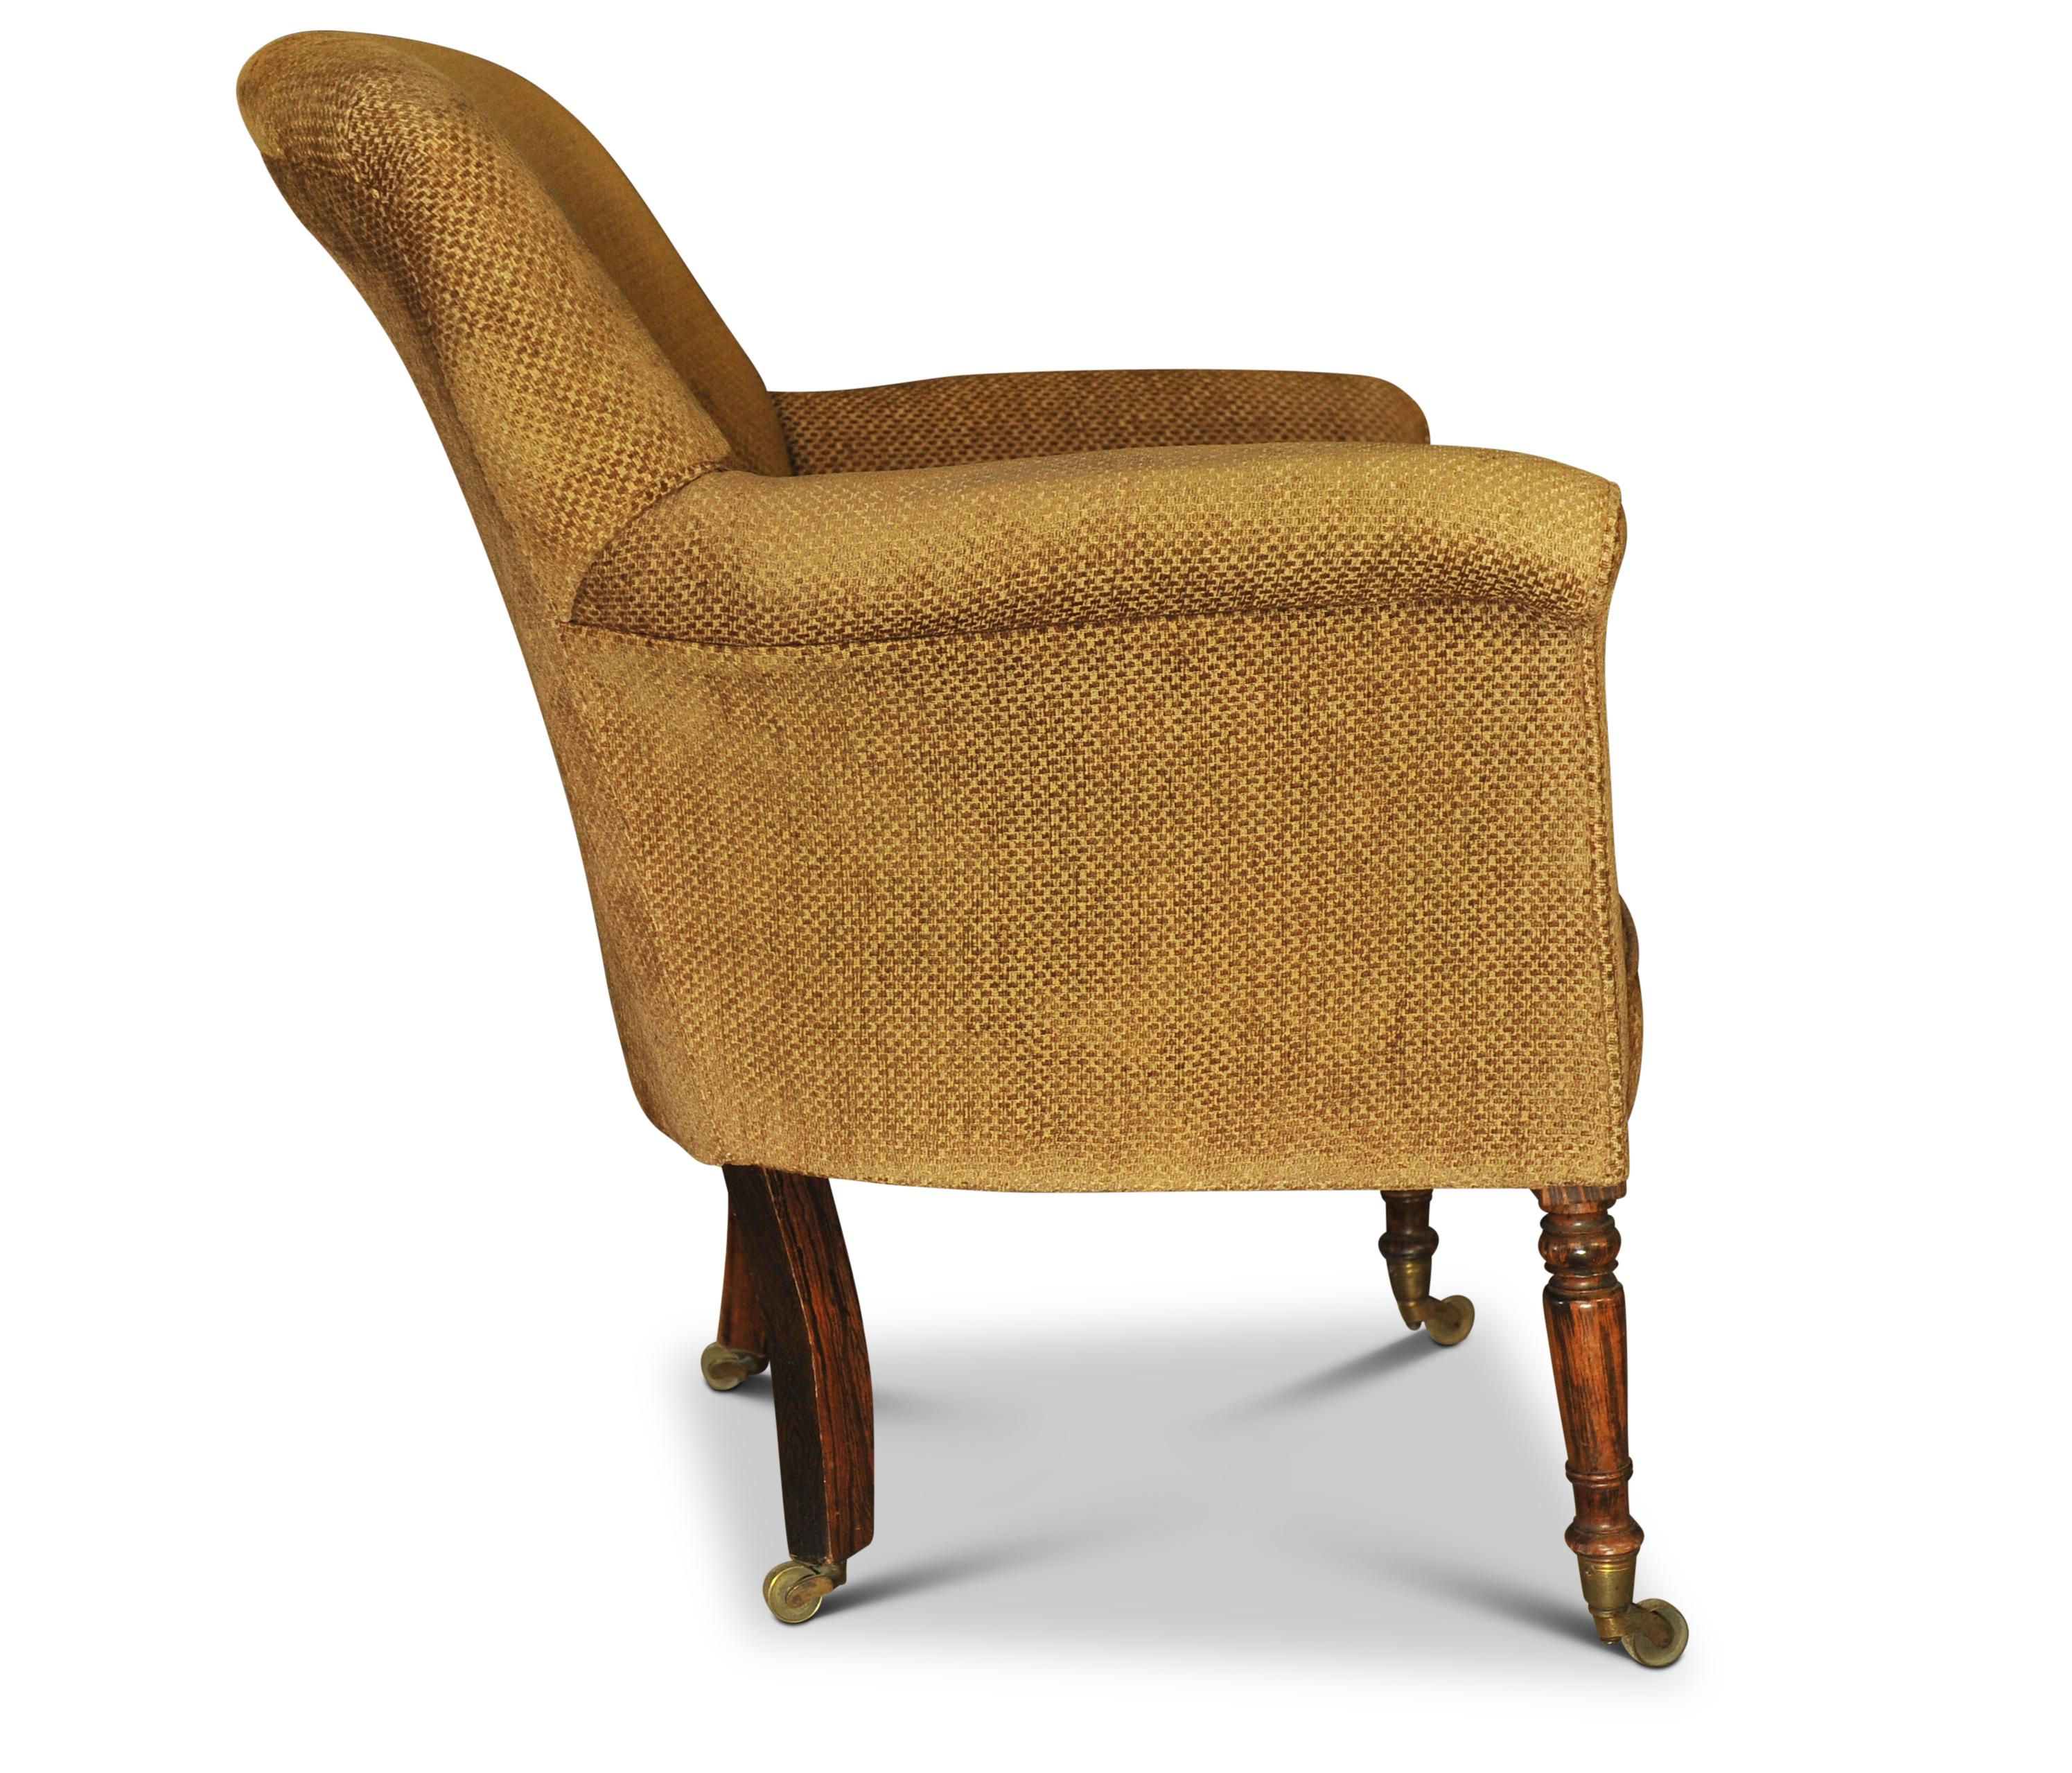 19th Century William IV Tub Chair On Brass Castors, Sabre Legs & Chenille Finish For Sale 3